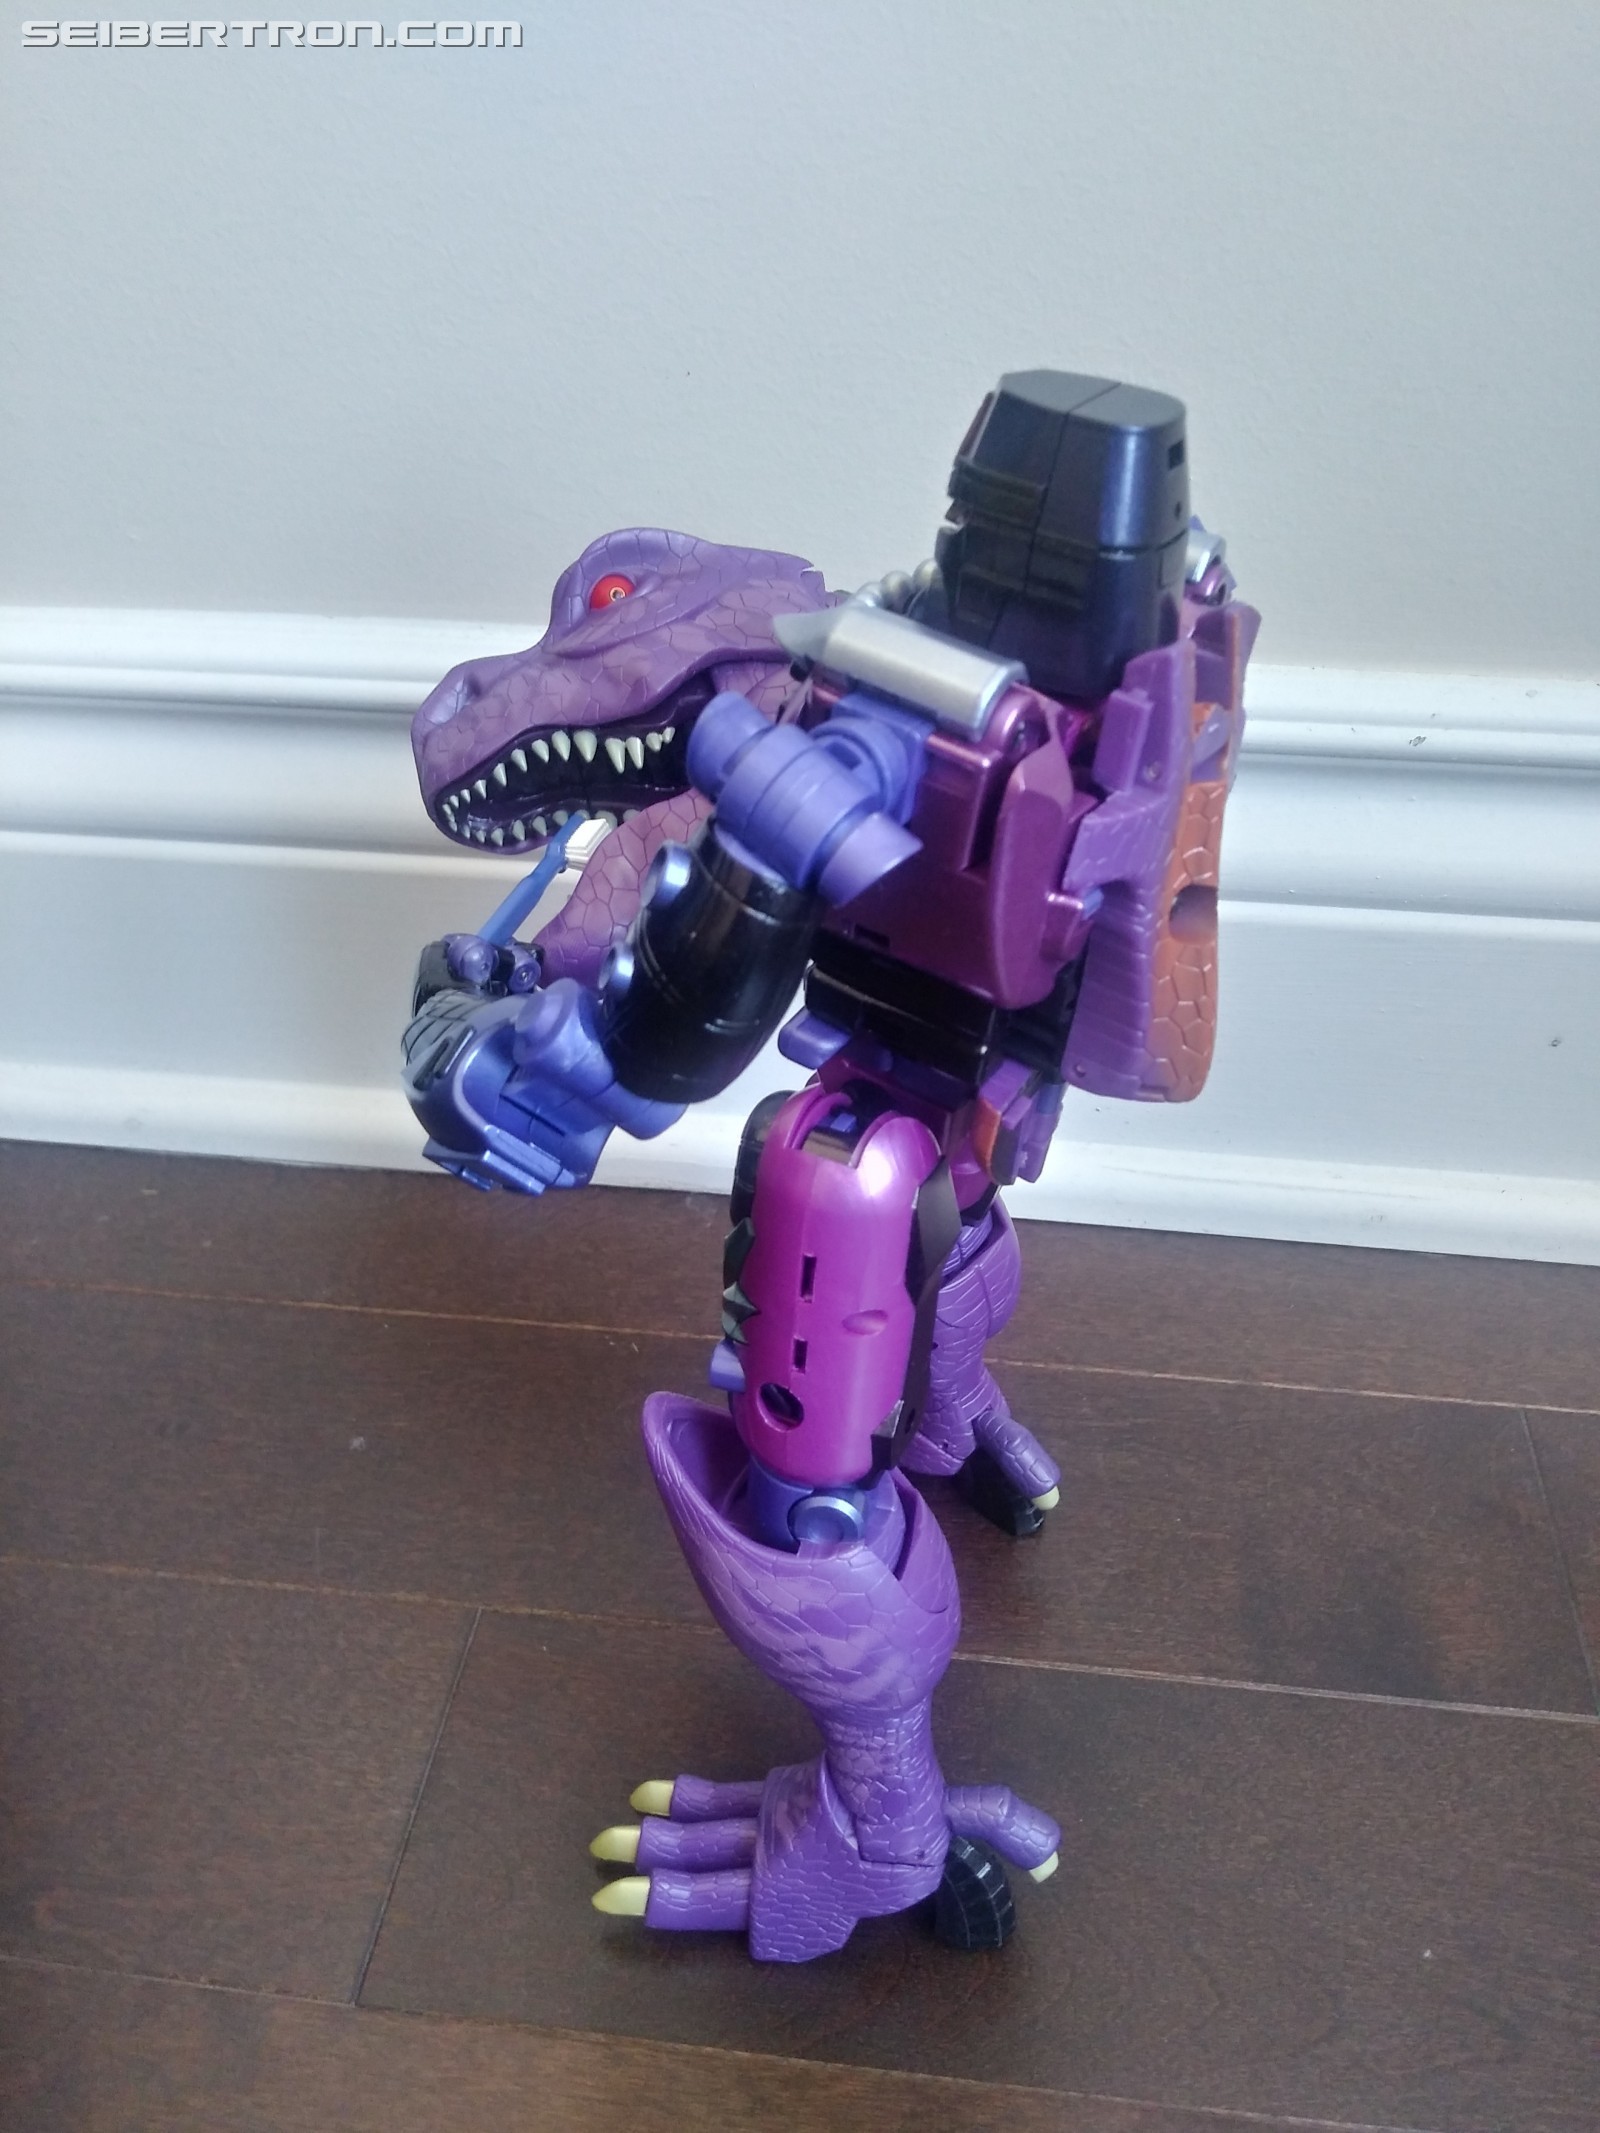 Transformers News: Pictorial Review of Transformers Masterpiece MP-43 Beast Wars Megatron